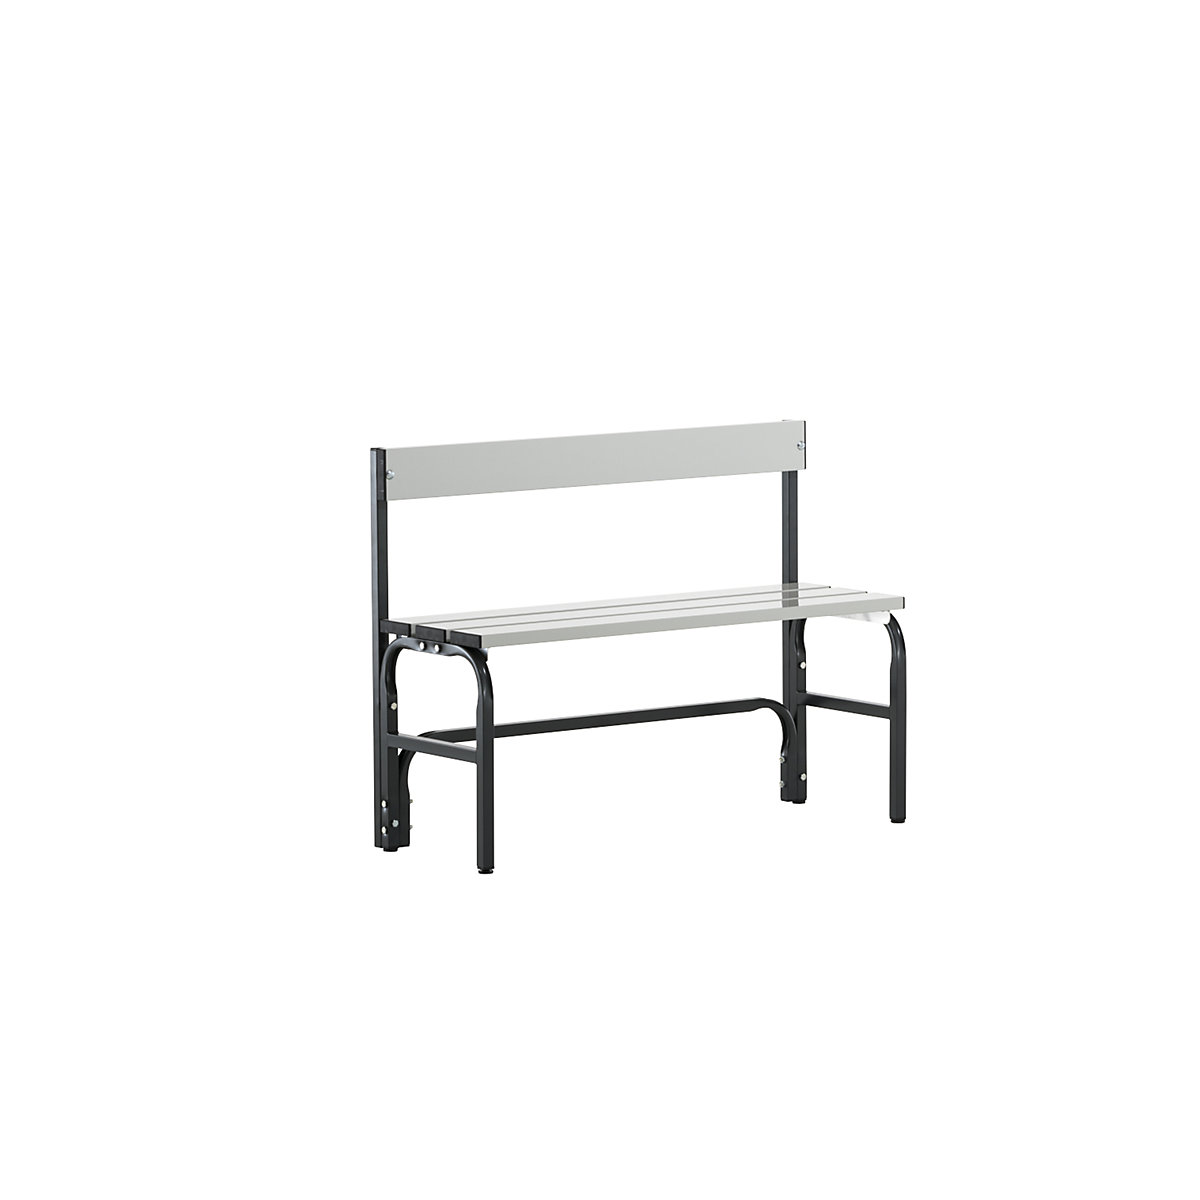 Sypro – Half height cloakroom bench with back rest, single-sided